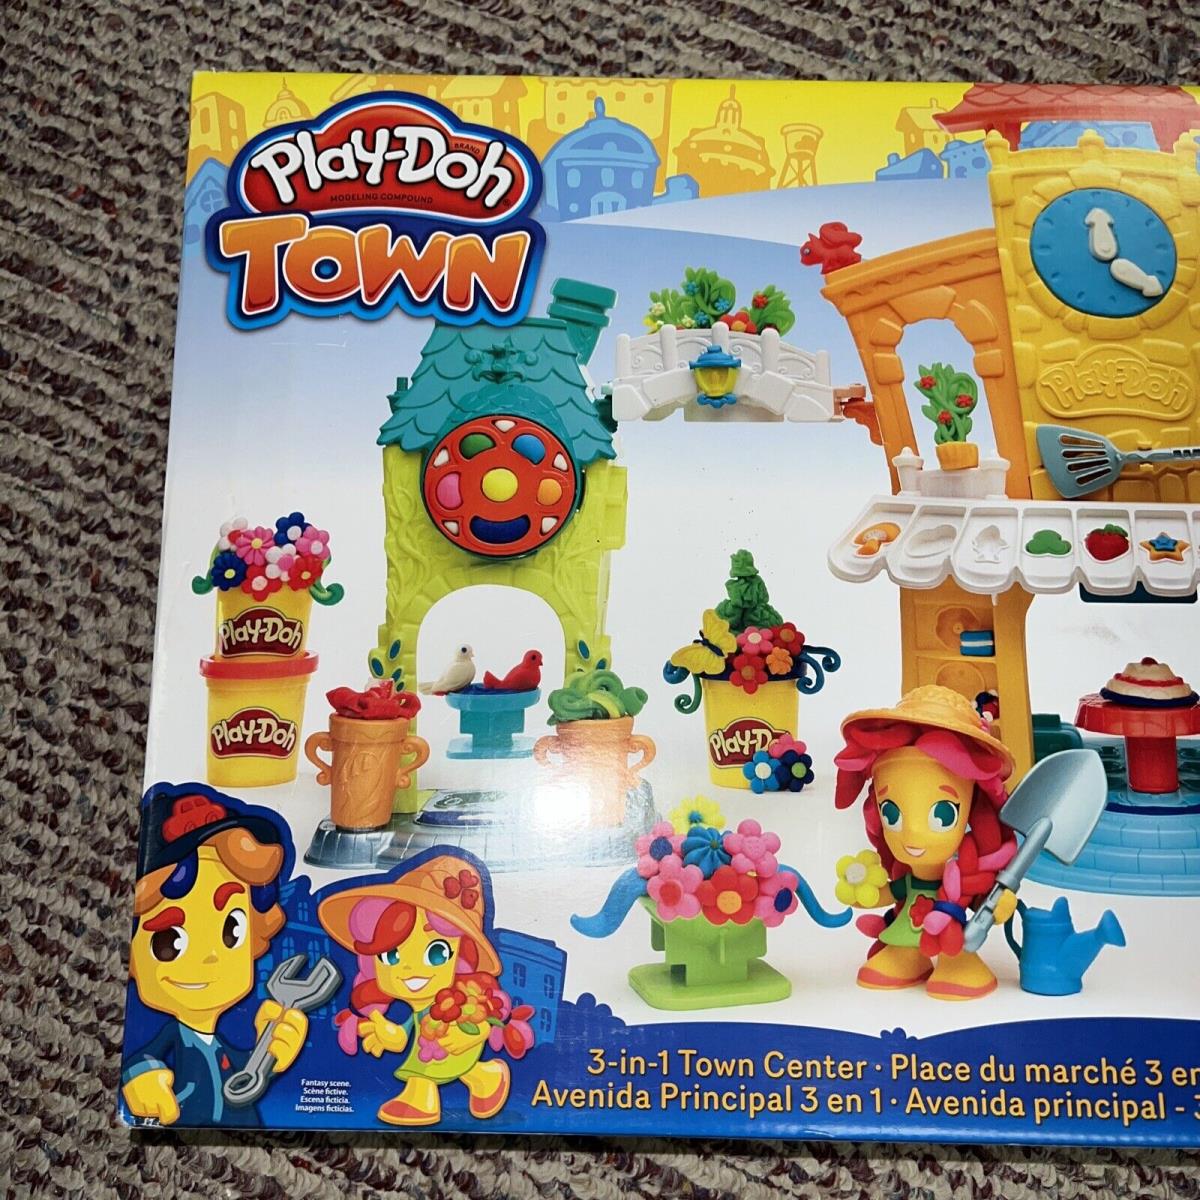 Play-doh Town 3-in-1 Town Center Hasbro 2015 Modeling Compound 8 Containers